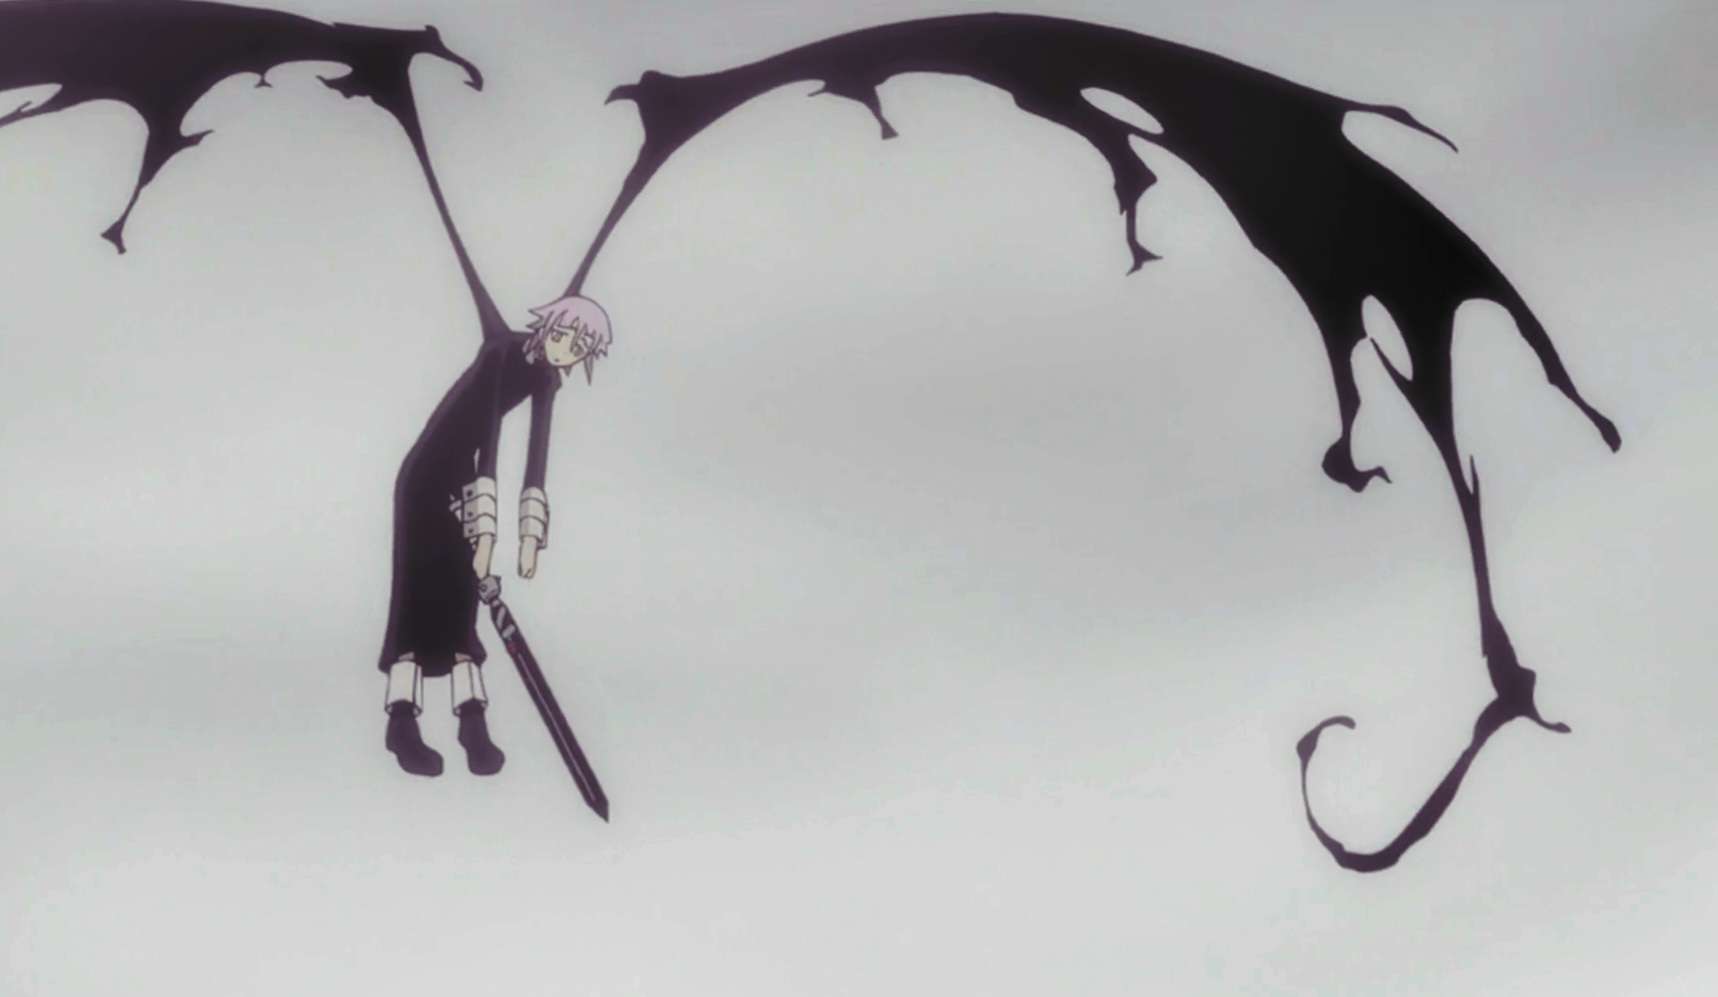 still image of crona with ragged-looking wings